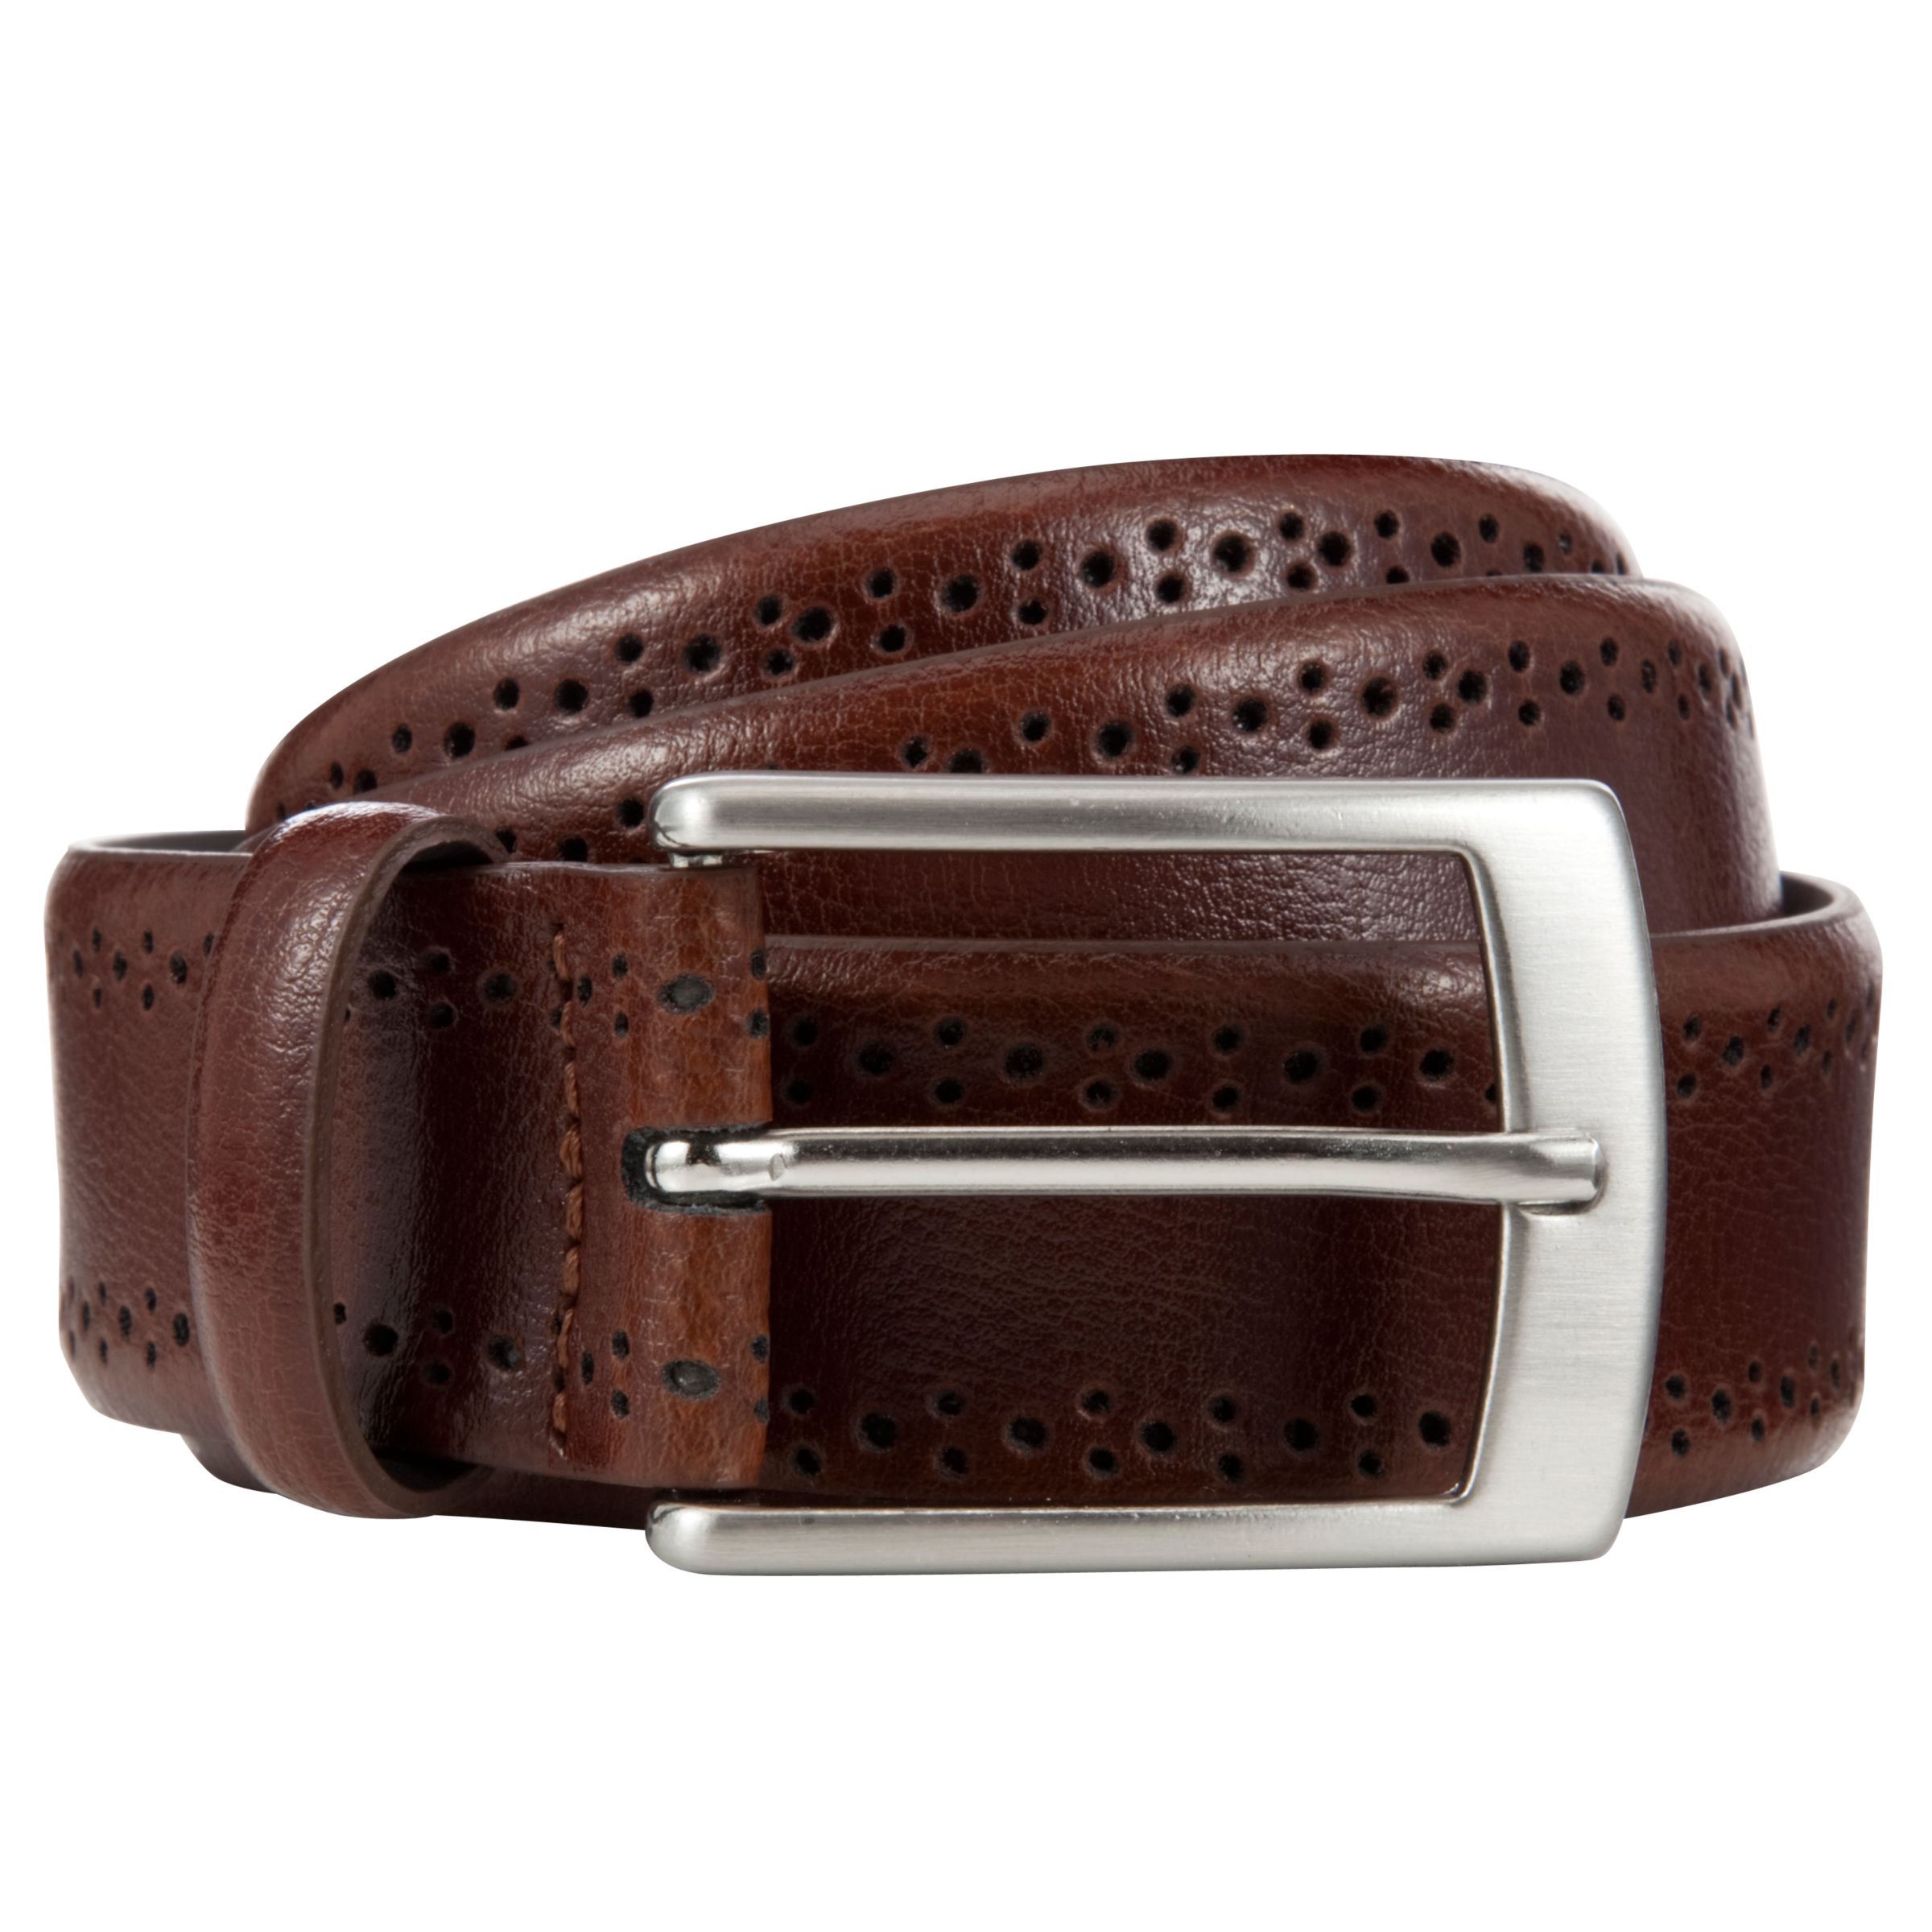 John Lewis & Partners Made In Italy Brogue Belt, Brown, M